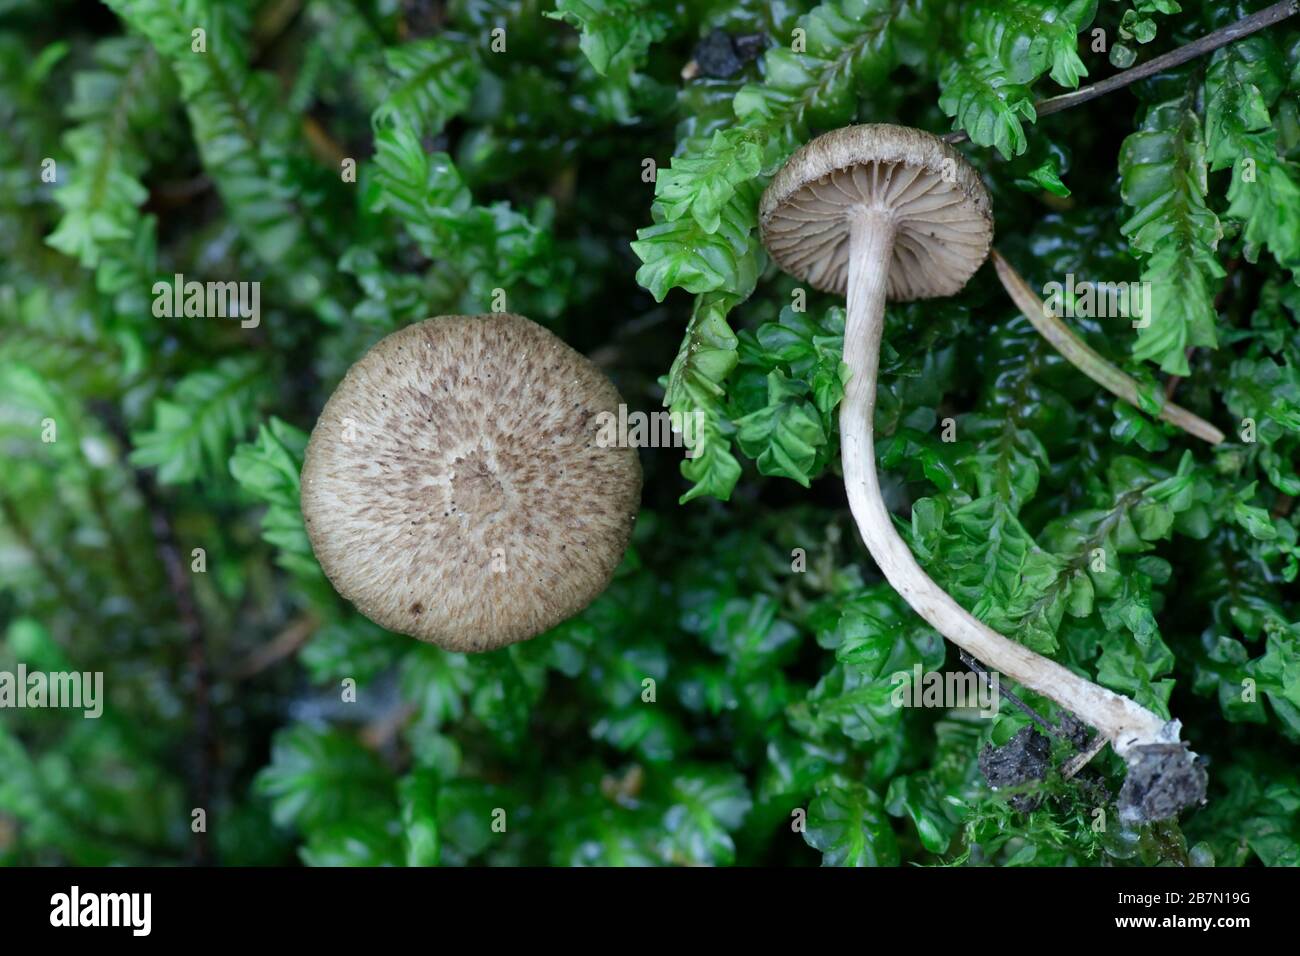 Inocybe cincinnata, commonly known as the collared fibrecap, wild mushroom from Finland Stock Photo